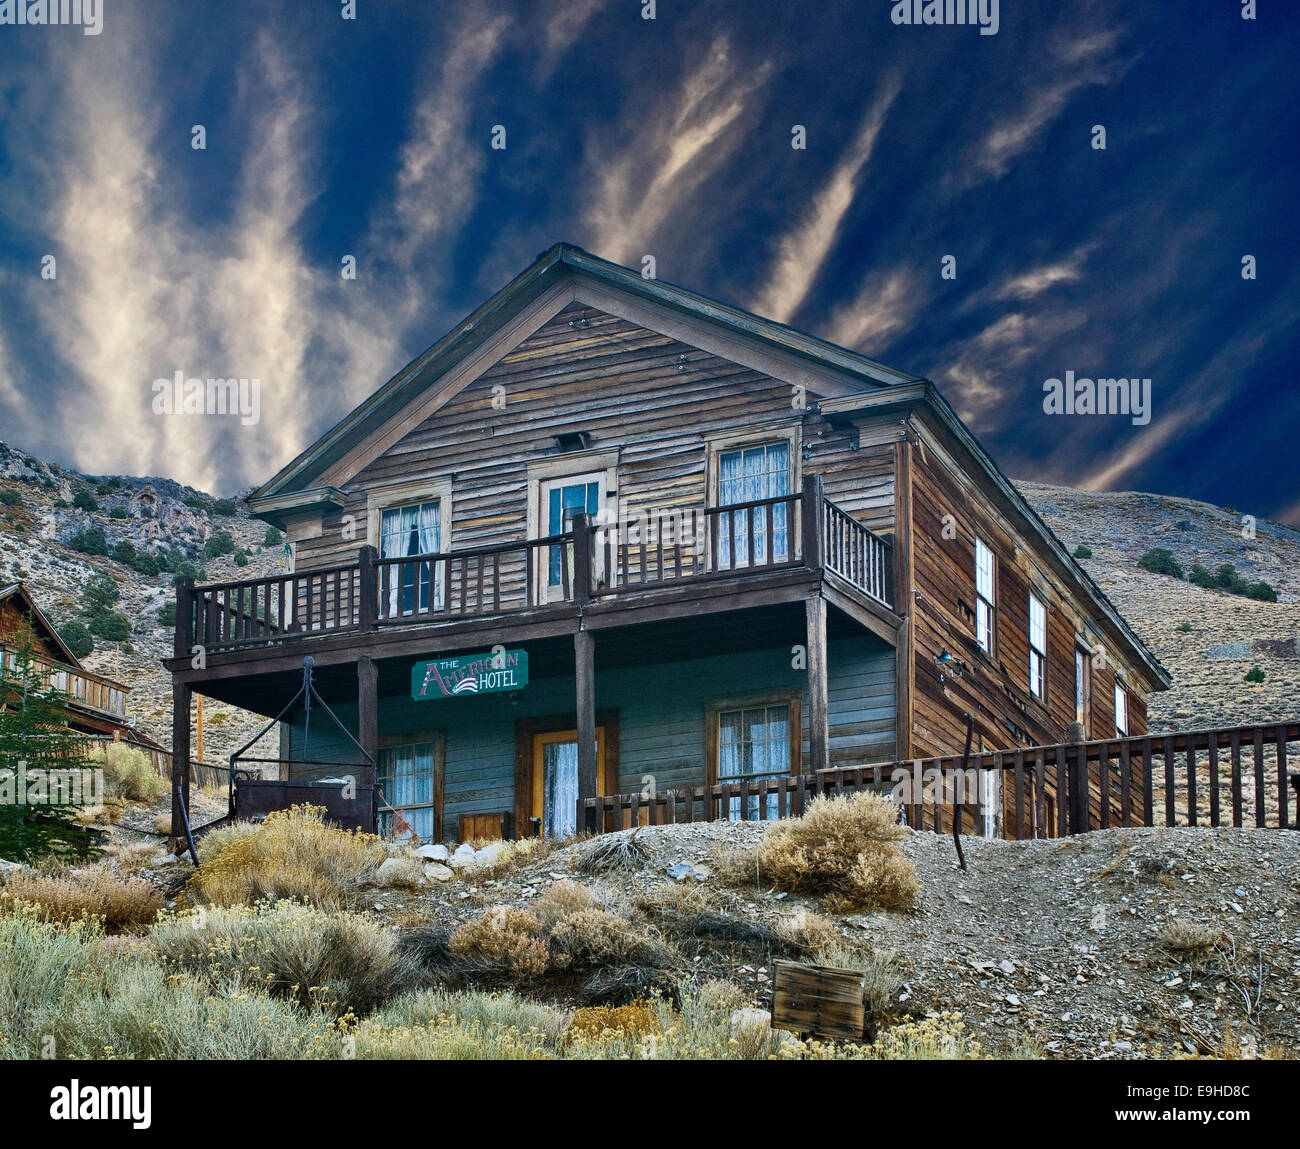 Abandoned American Hotel in Cerro Gordo ghost town at Cerro Gordo Road, Inyo Mountains over Owens Valley, California, USA Stock Photo